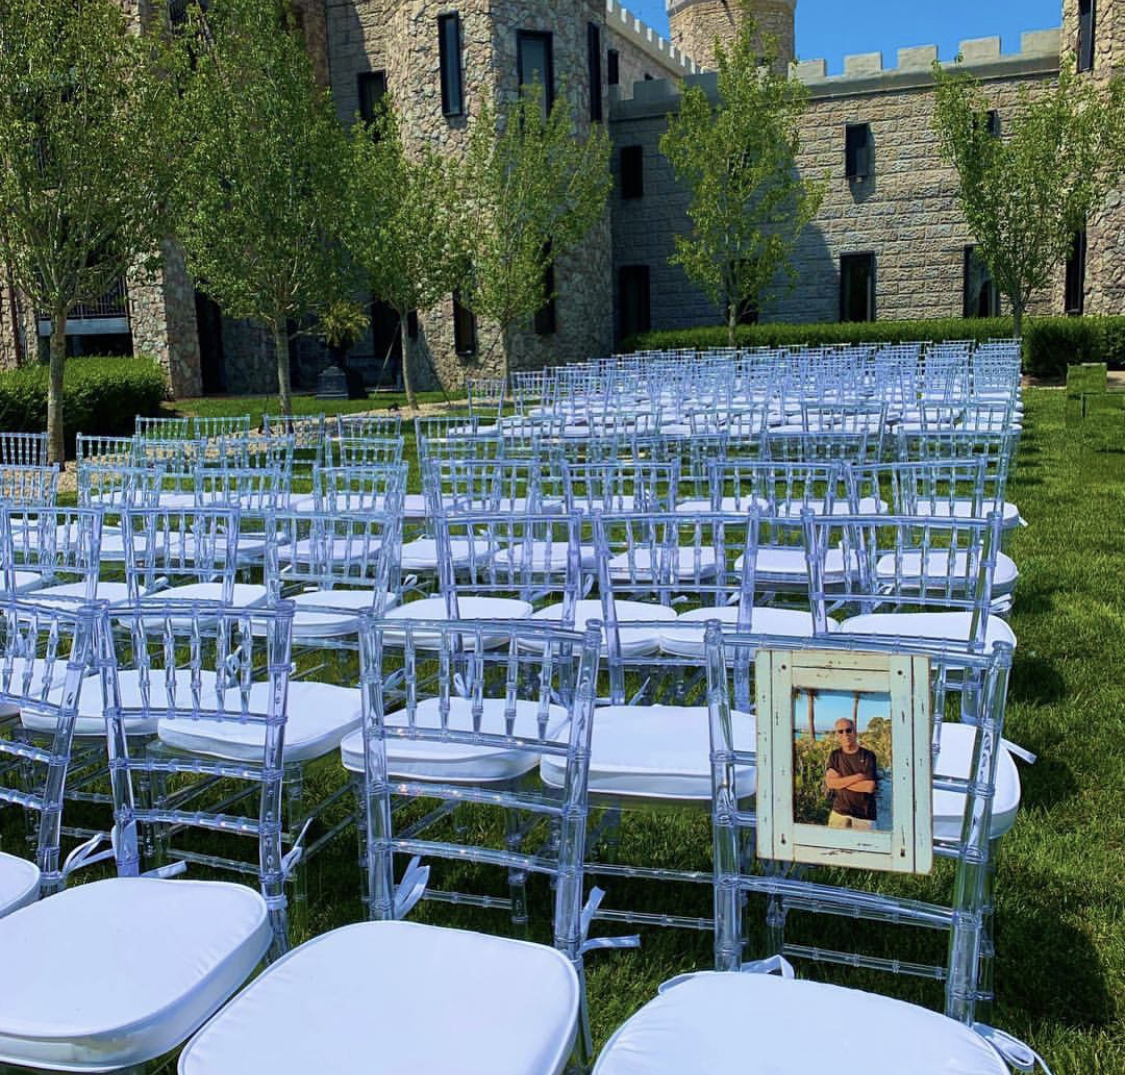 A Seat For Jax's Dad At The Ceremony